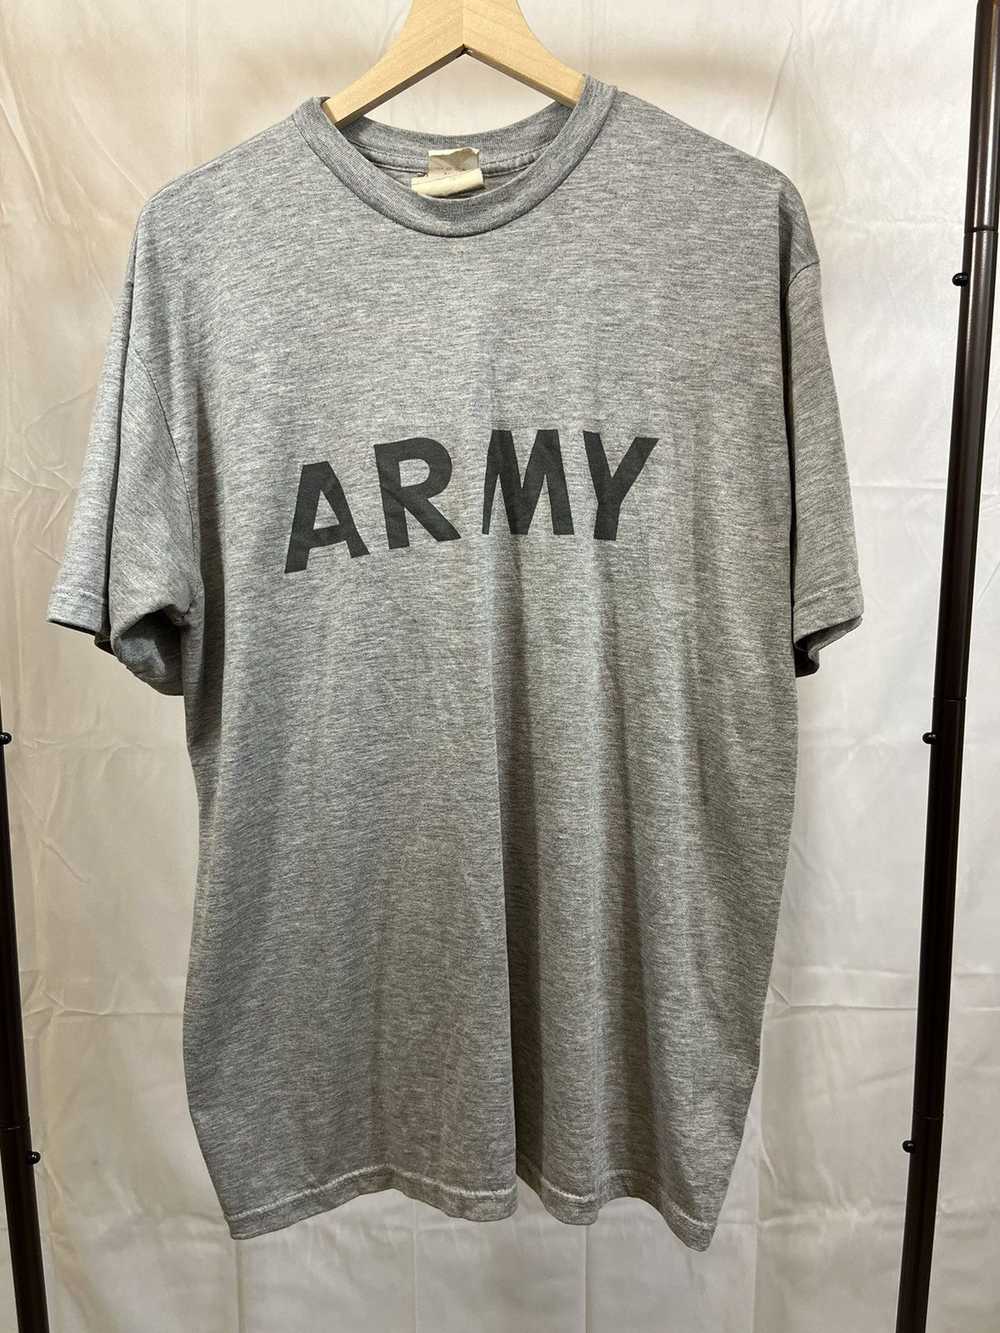 Military × Vintage Vintage ARMY Grey Thin Faded M… - image 1